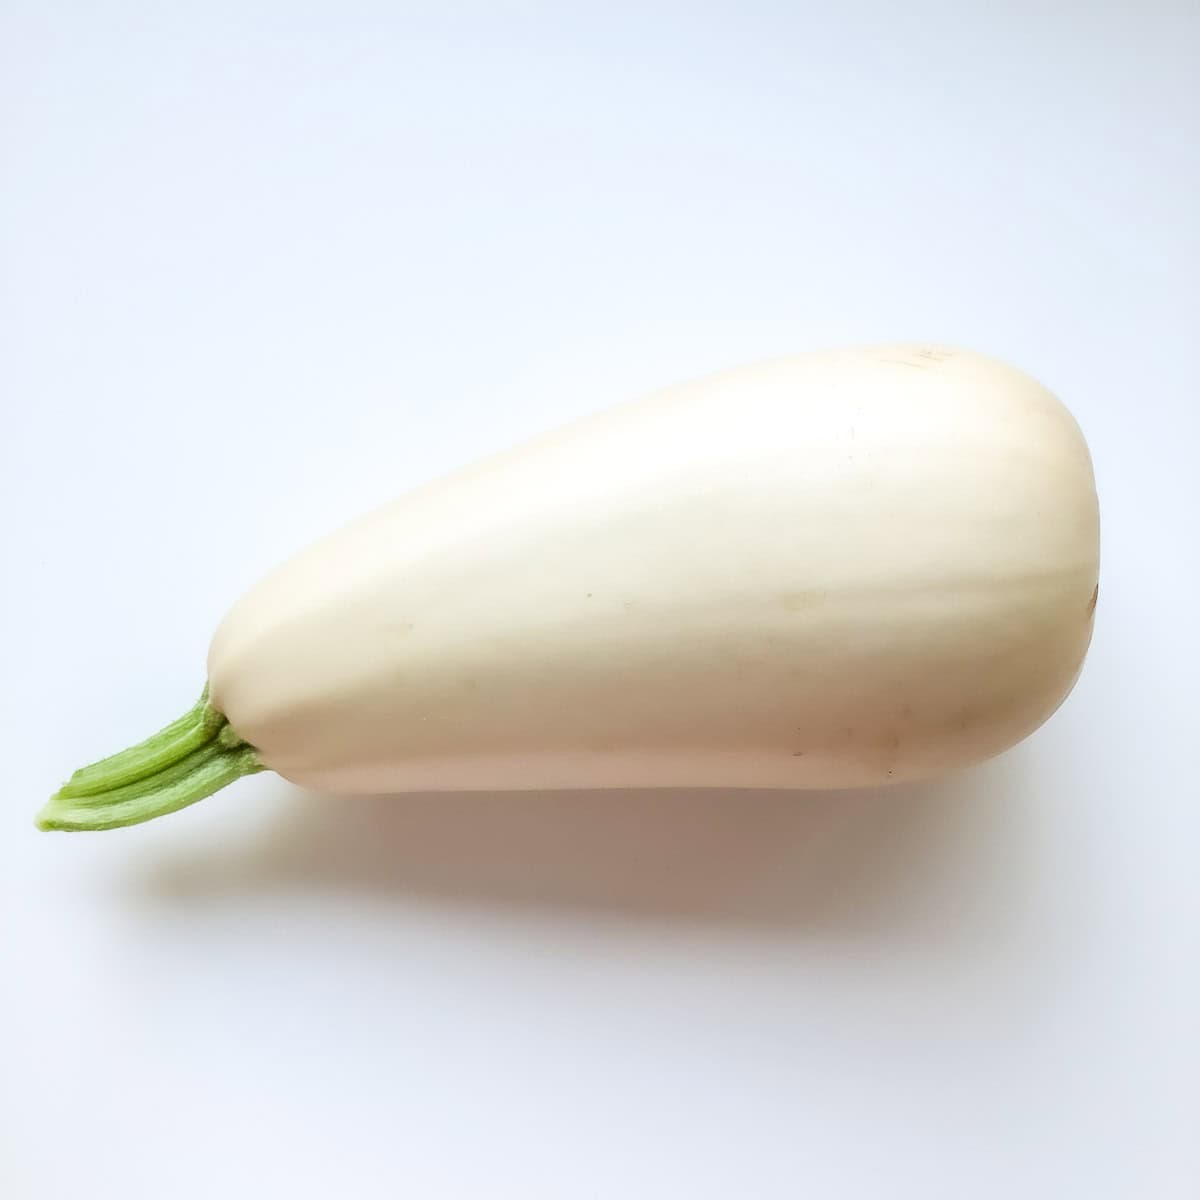 An image of white squash on a white countertop.